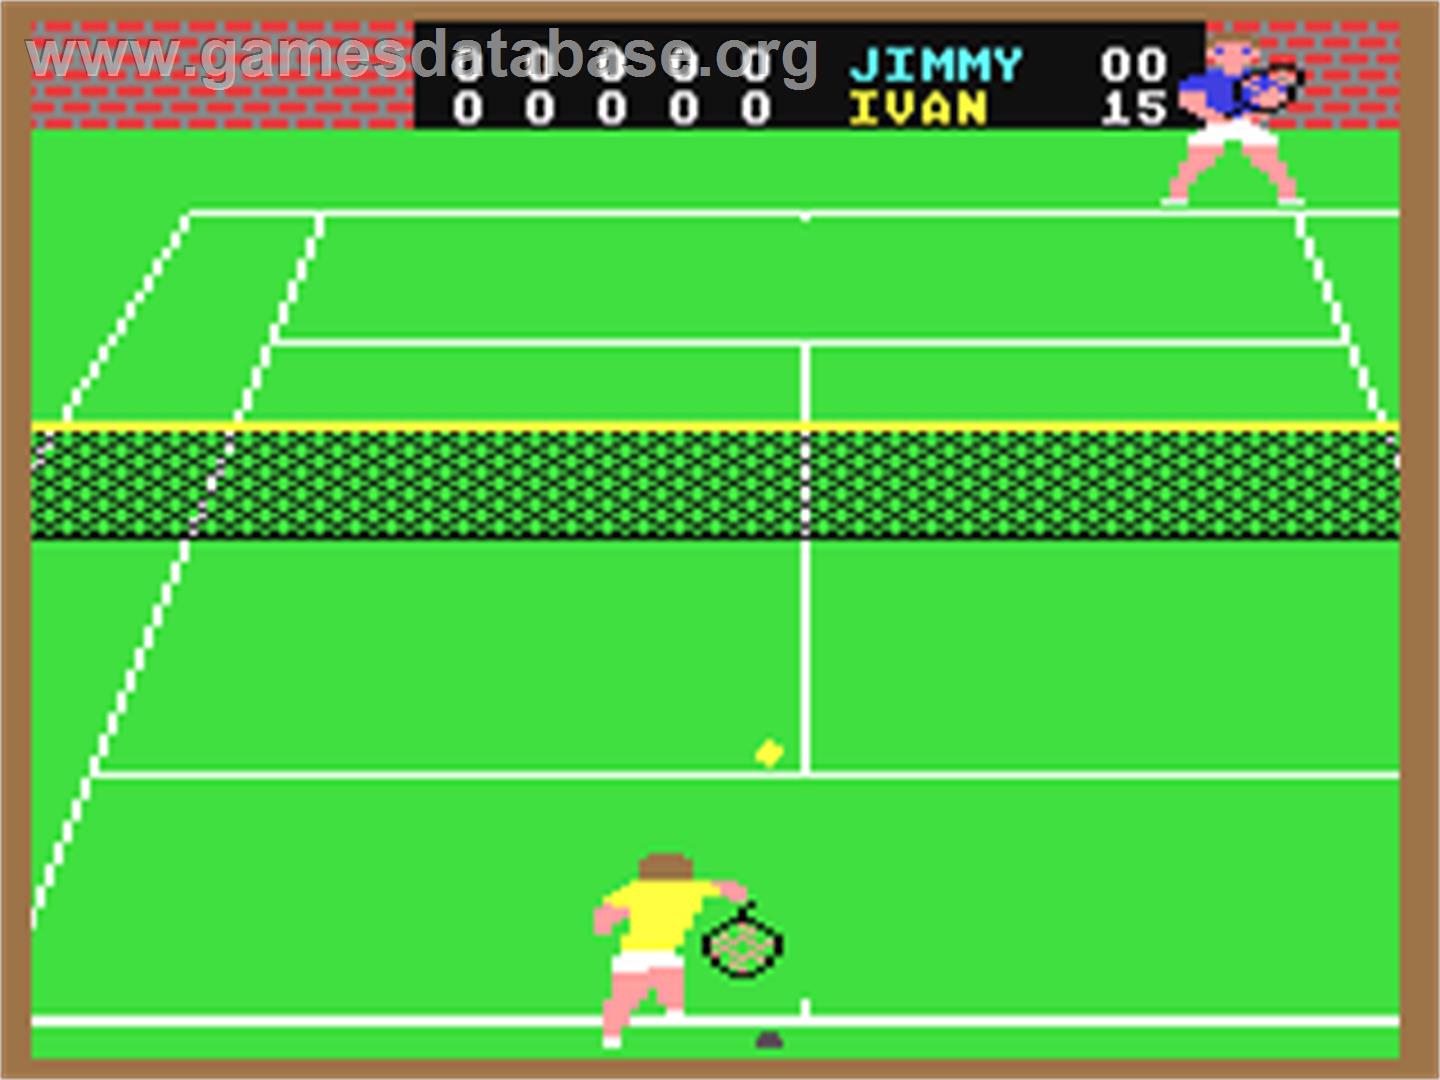 On-Court Tennis - Commodore 64 - Artwork - In Game